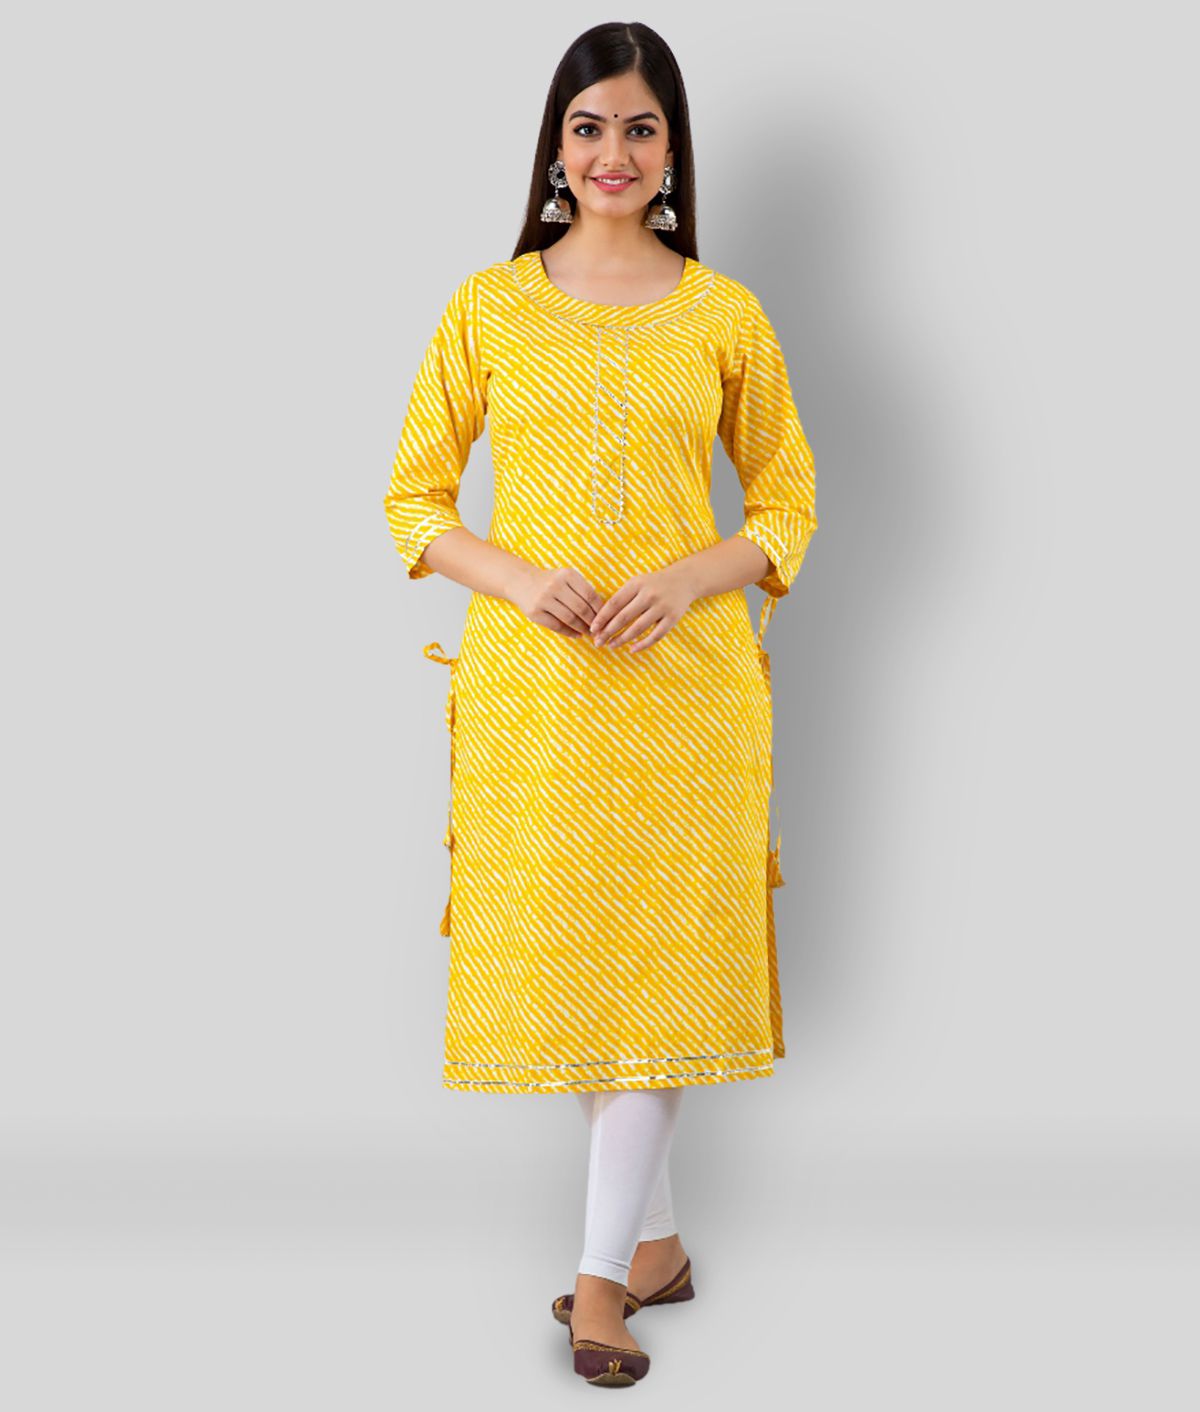 ZAMAISHA  Wine Rayon Womens Flared Kurti  Pack of 1   Buy ZAMAISHA   Wine Rayon Womens Flared Kurti  Pack of 1  Online at Best Prices in  India on Snapdeal